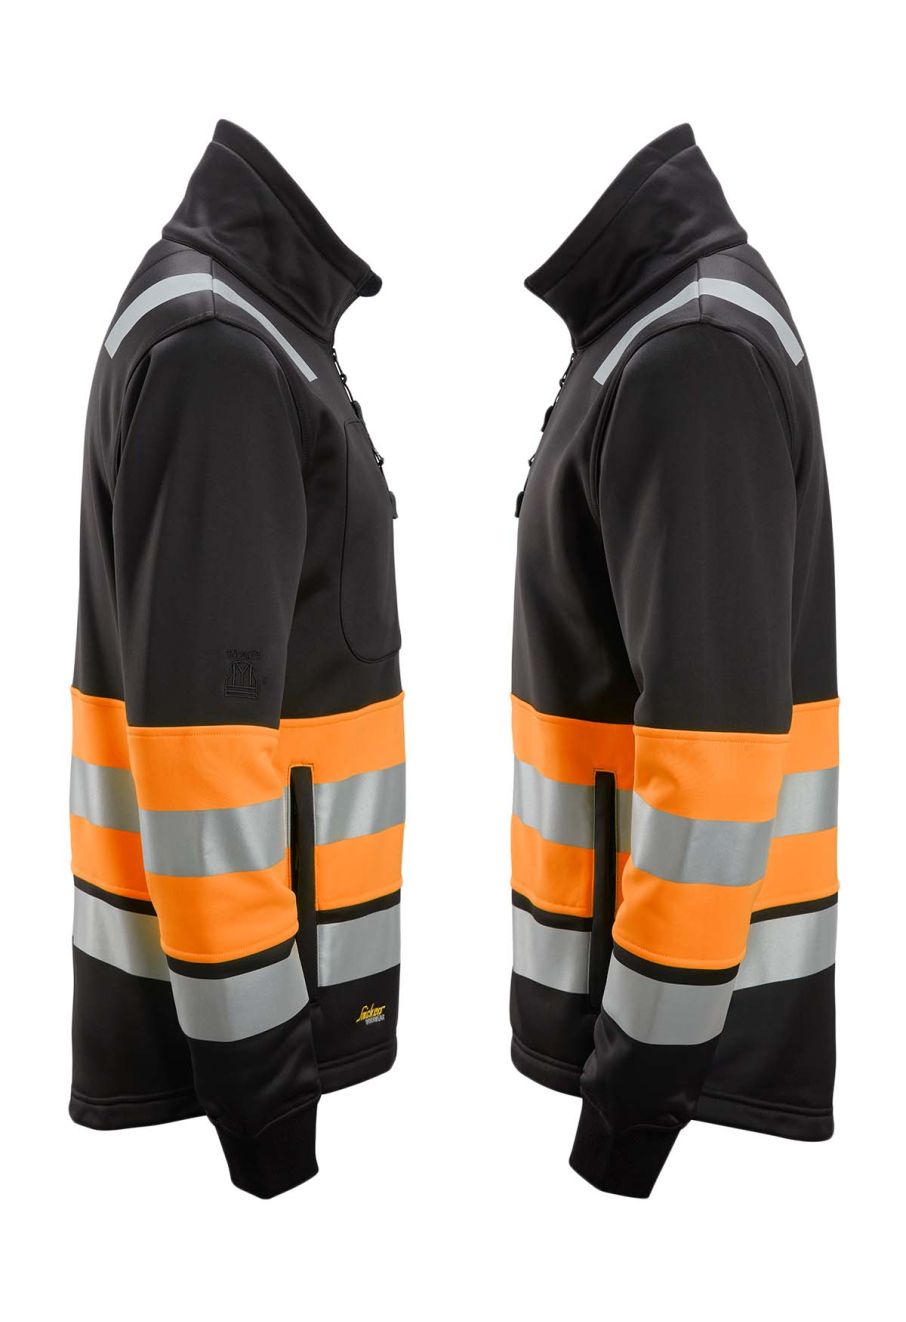 Snickers Workwear, Trousers, Jackets, Hoodies, Shirts, Hi-Vis & More